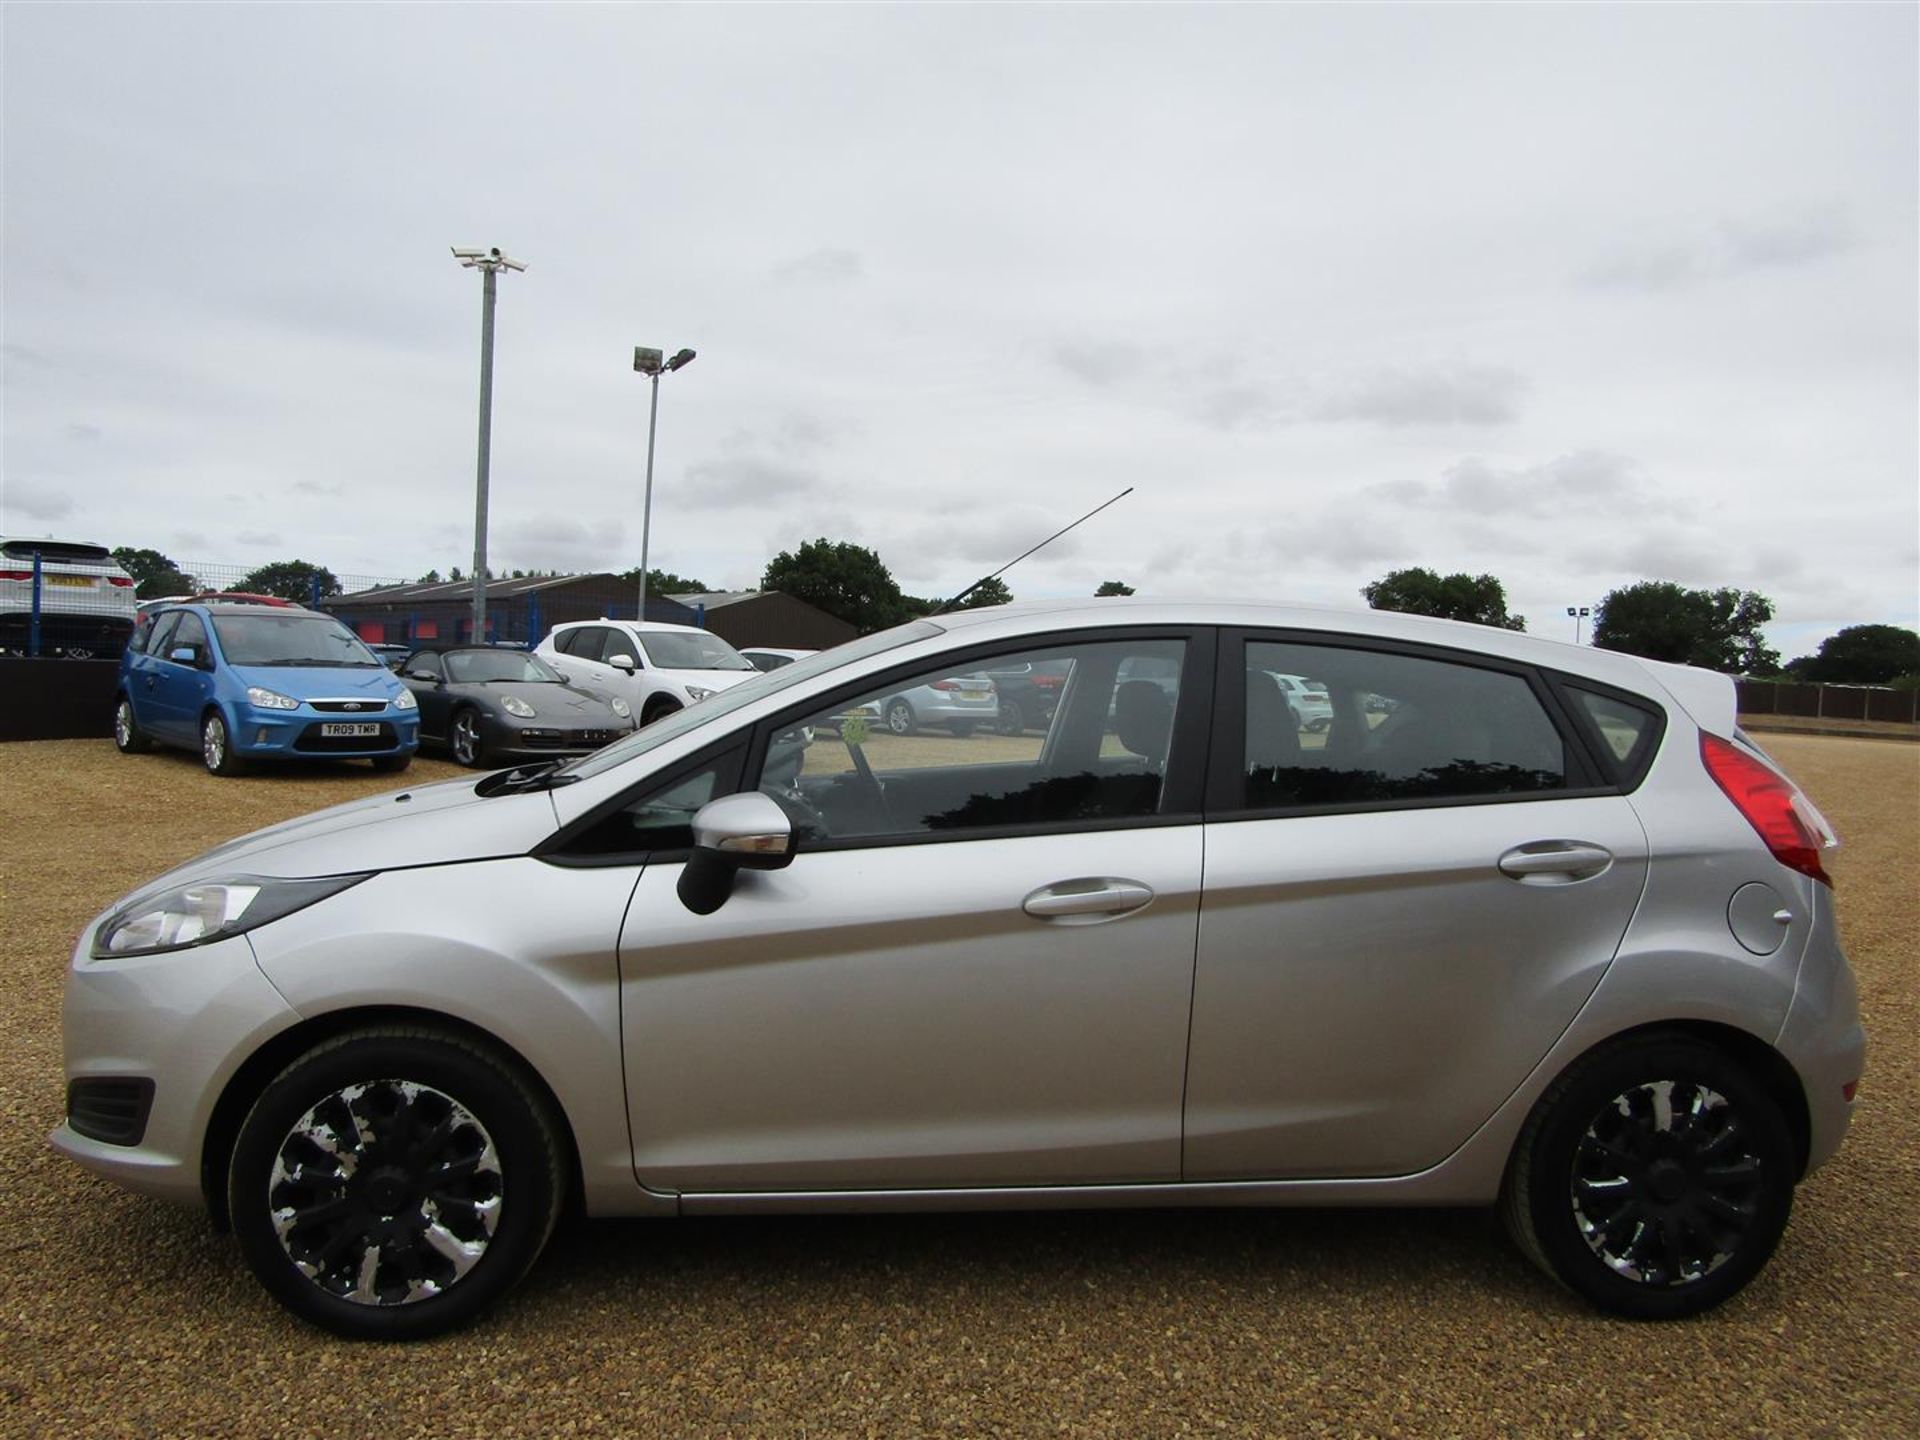 63 13 Ford Fiesta - Image 38 of 38